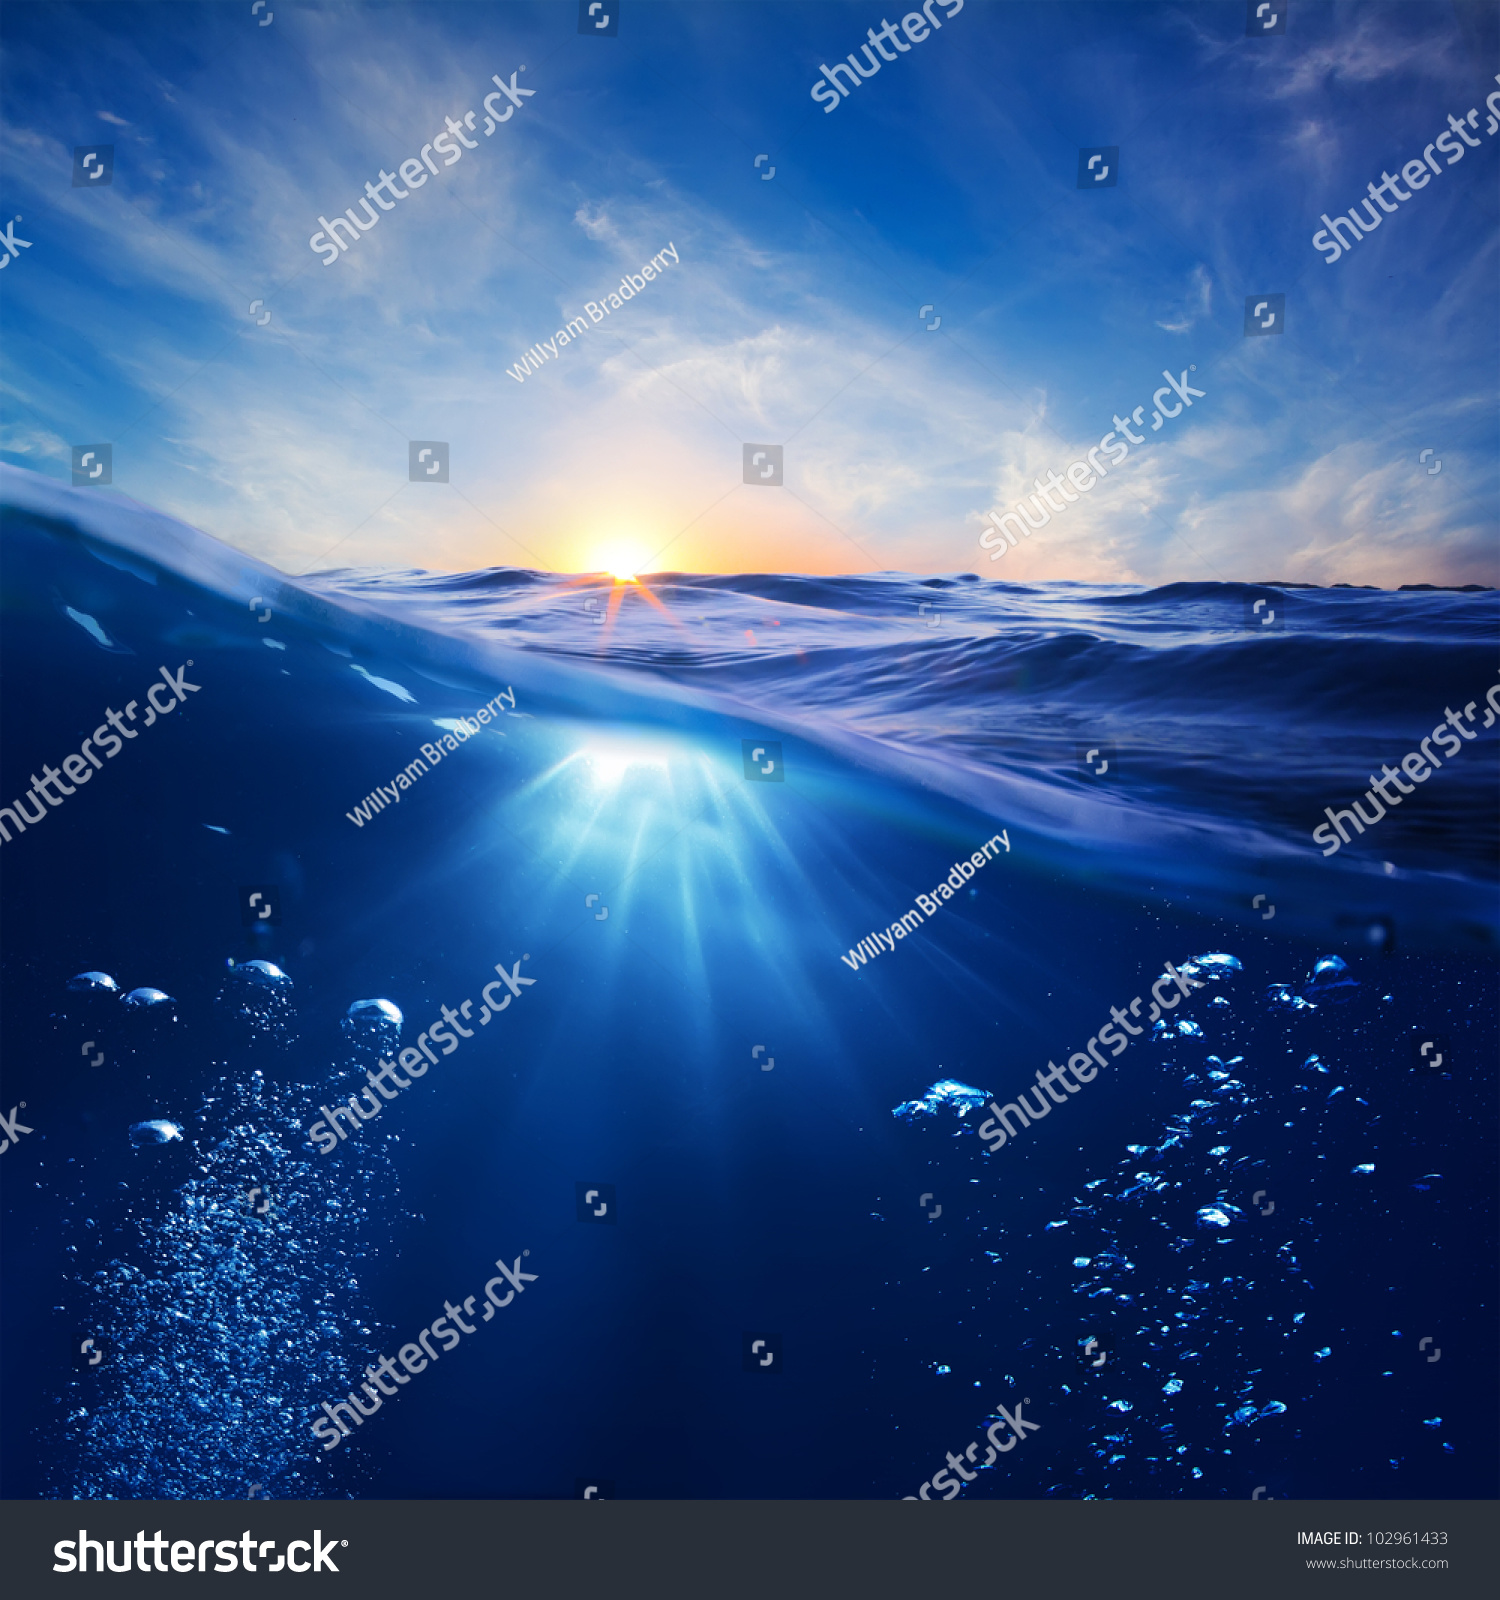 Design Template With Underwater Part And Sunset Skylight Splitted By ...